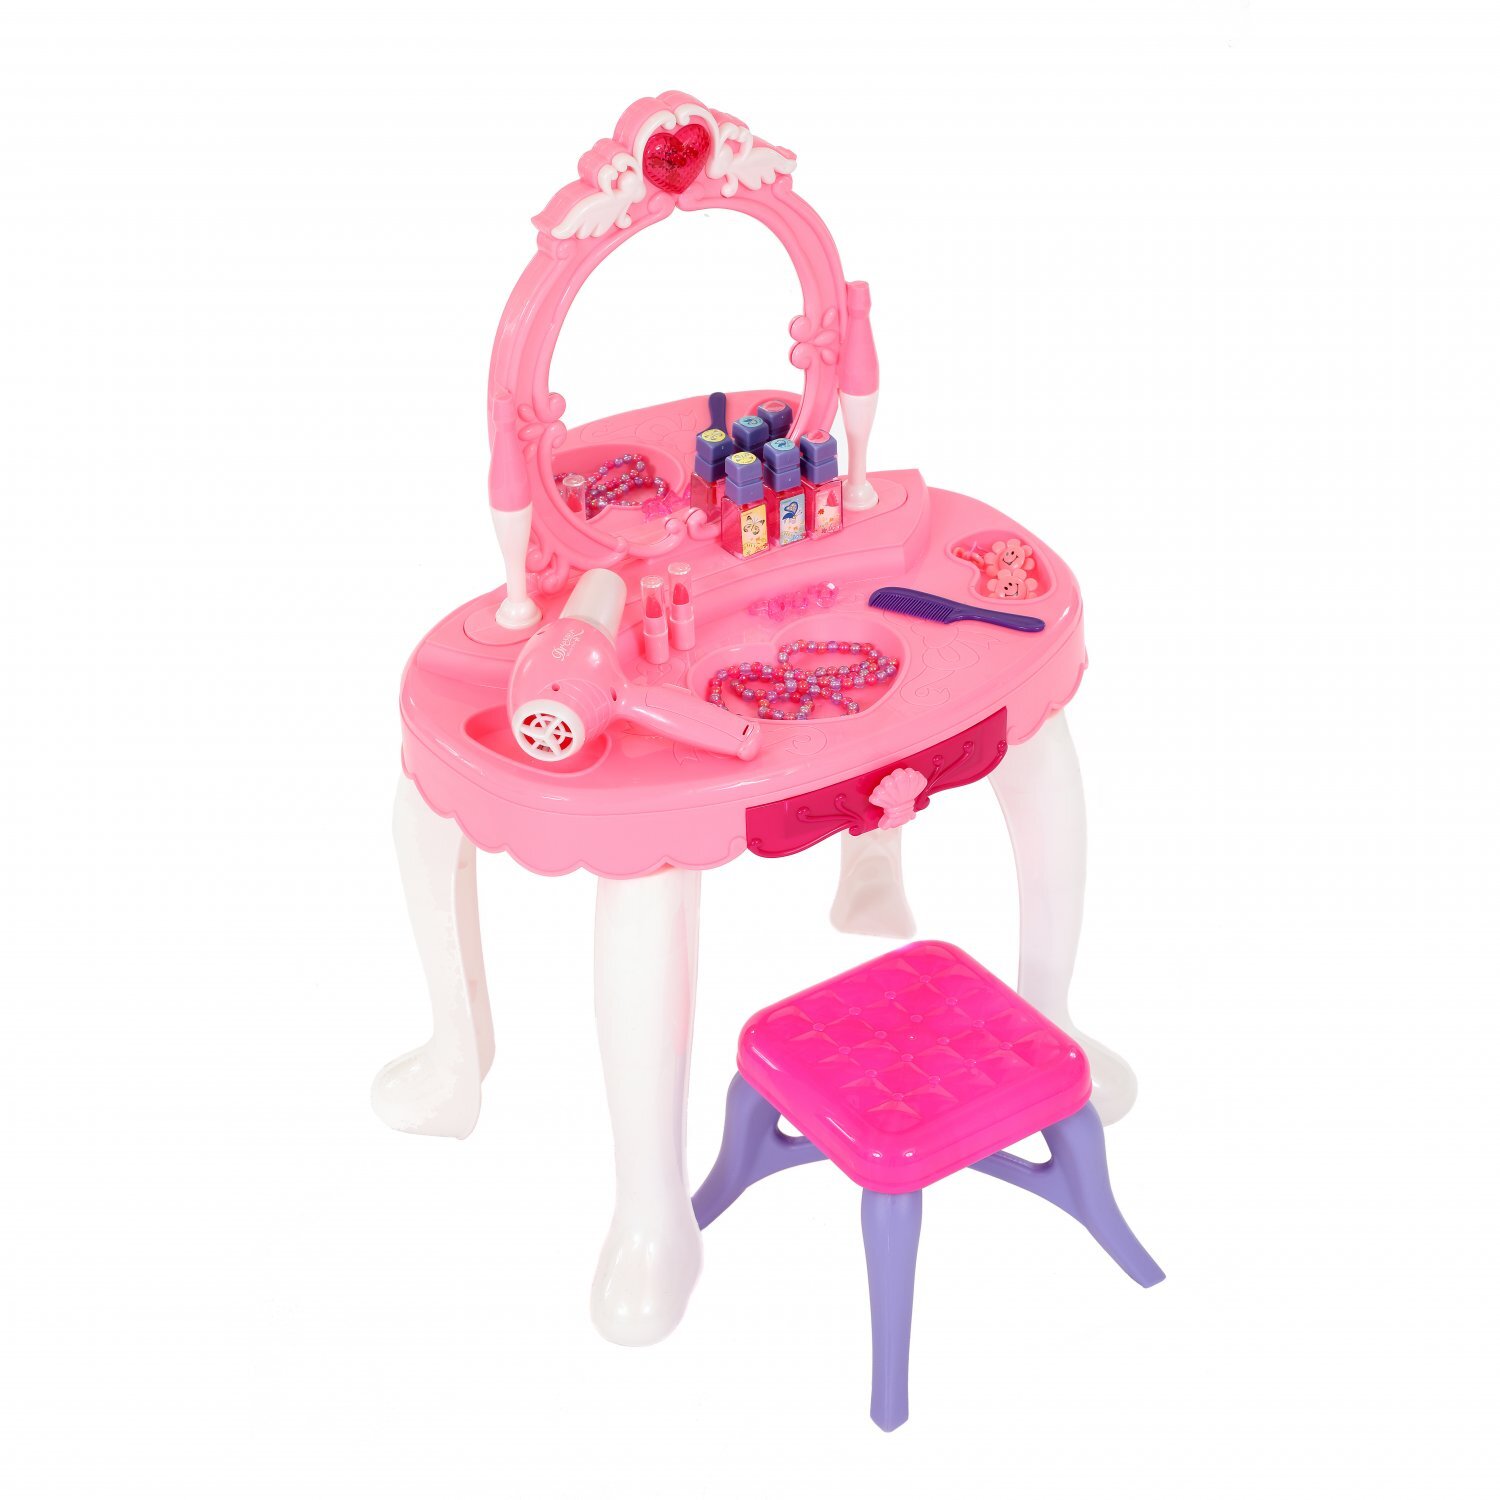 Kids Girl Glamour Mirror Dressing Table Play Set w/ Light & Sounds Toy Game Gift 